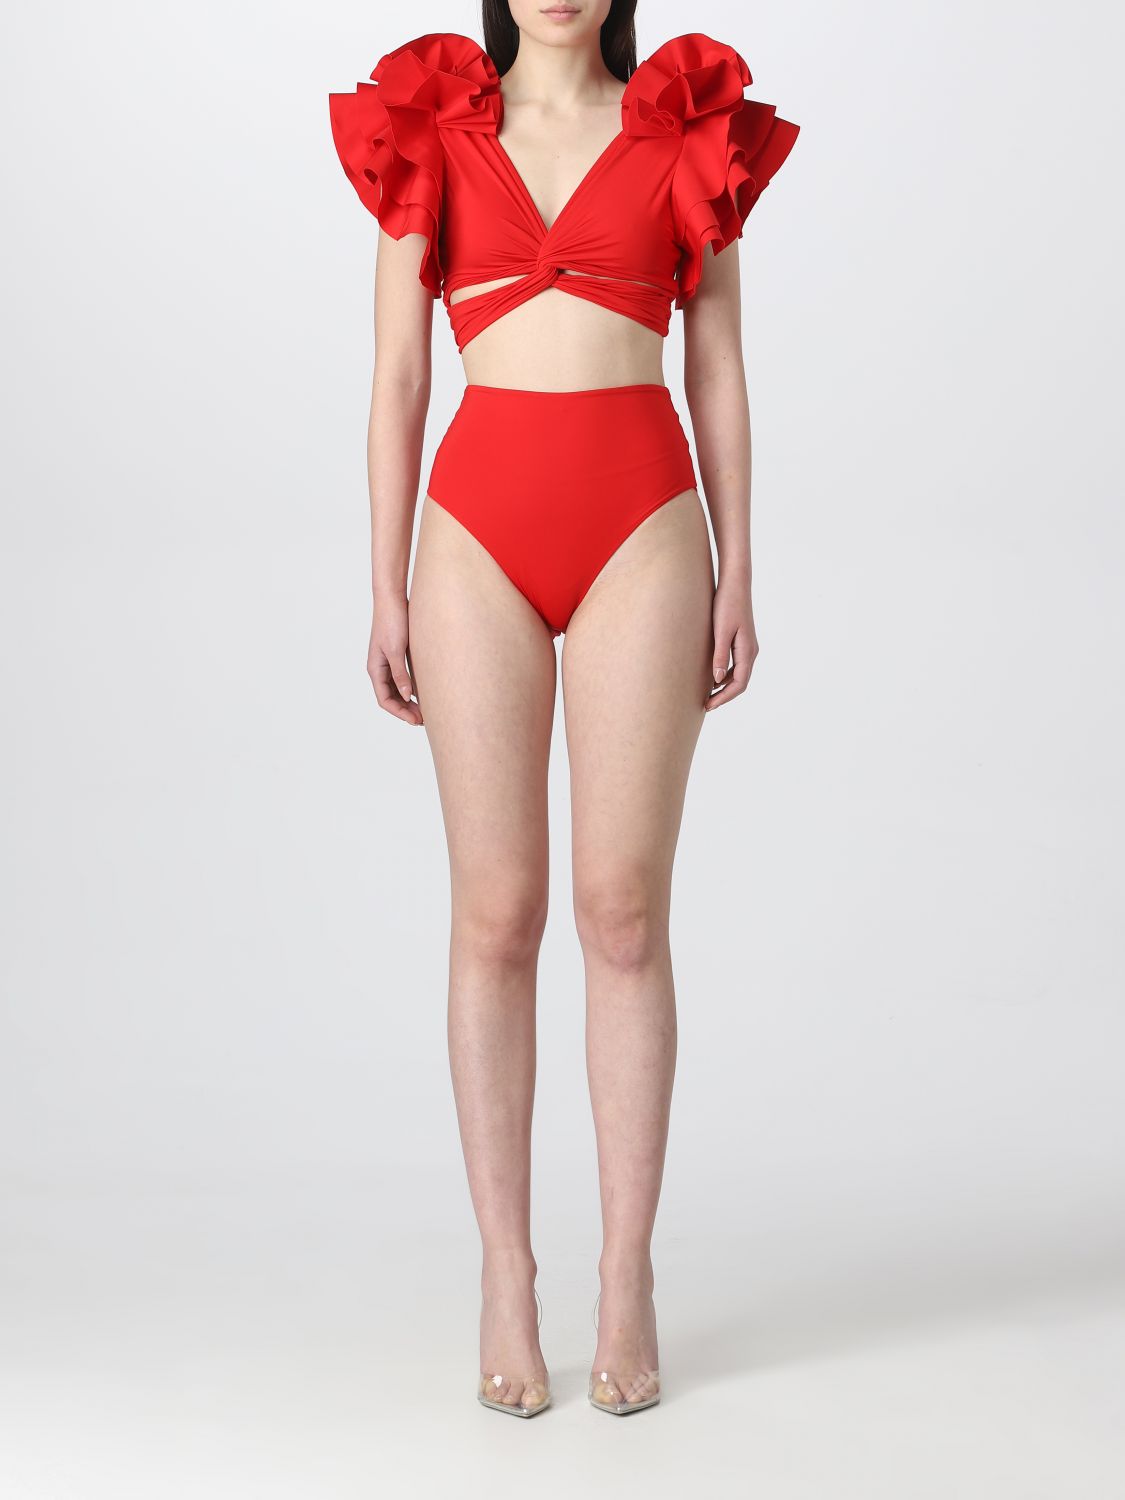 MAYGEL CORONEL SWIMSUIT MAYGEL CORONEL WOMAN COLOR RED,383451014